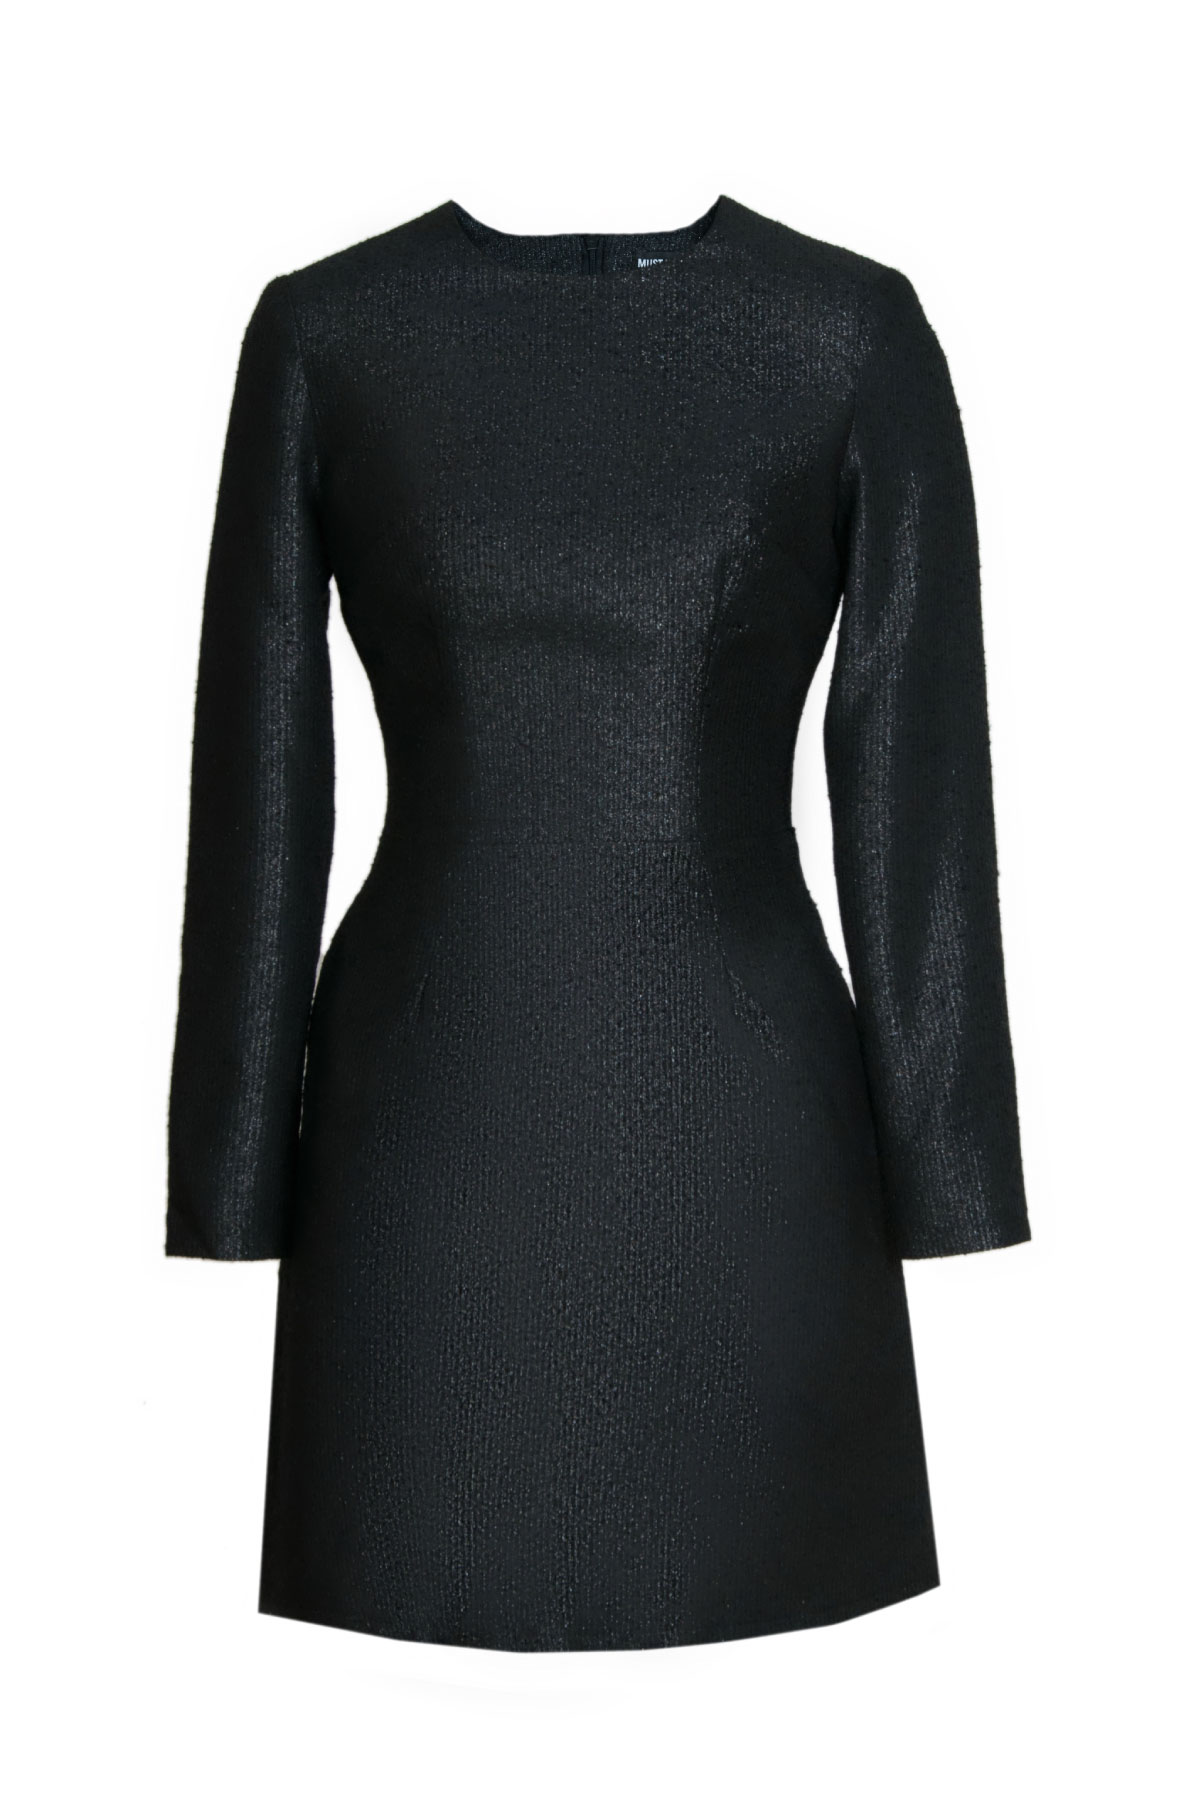 Above the knee A-line black dress with lurex , photo 7